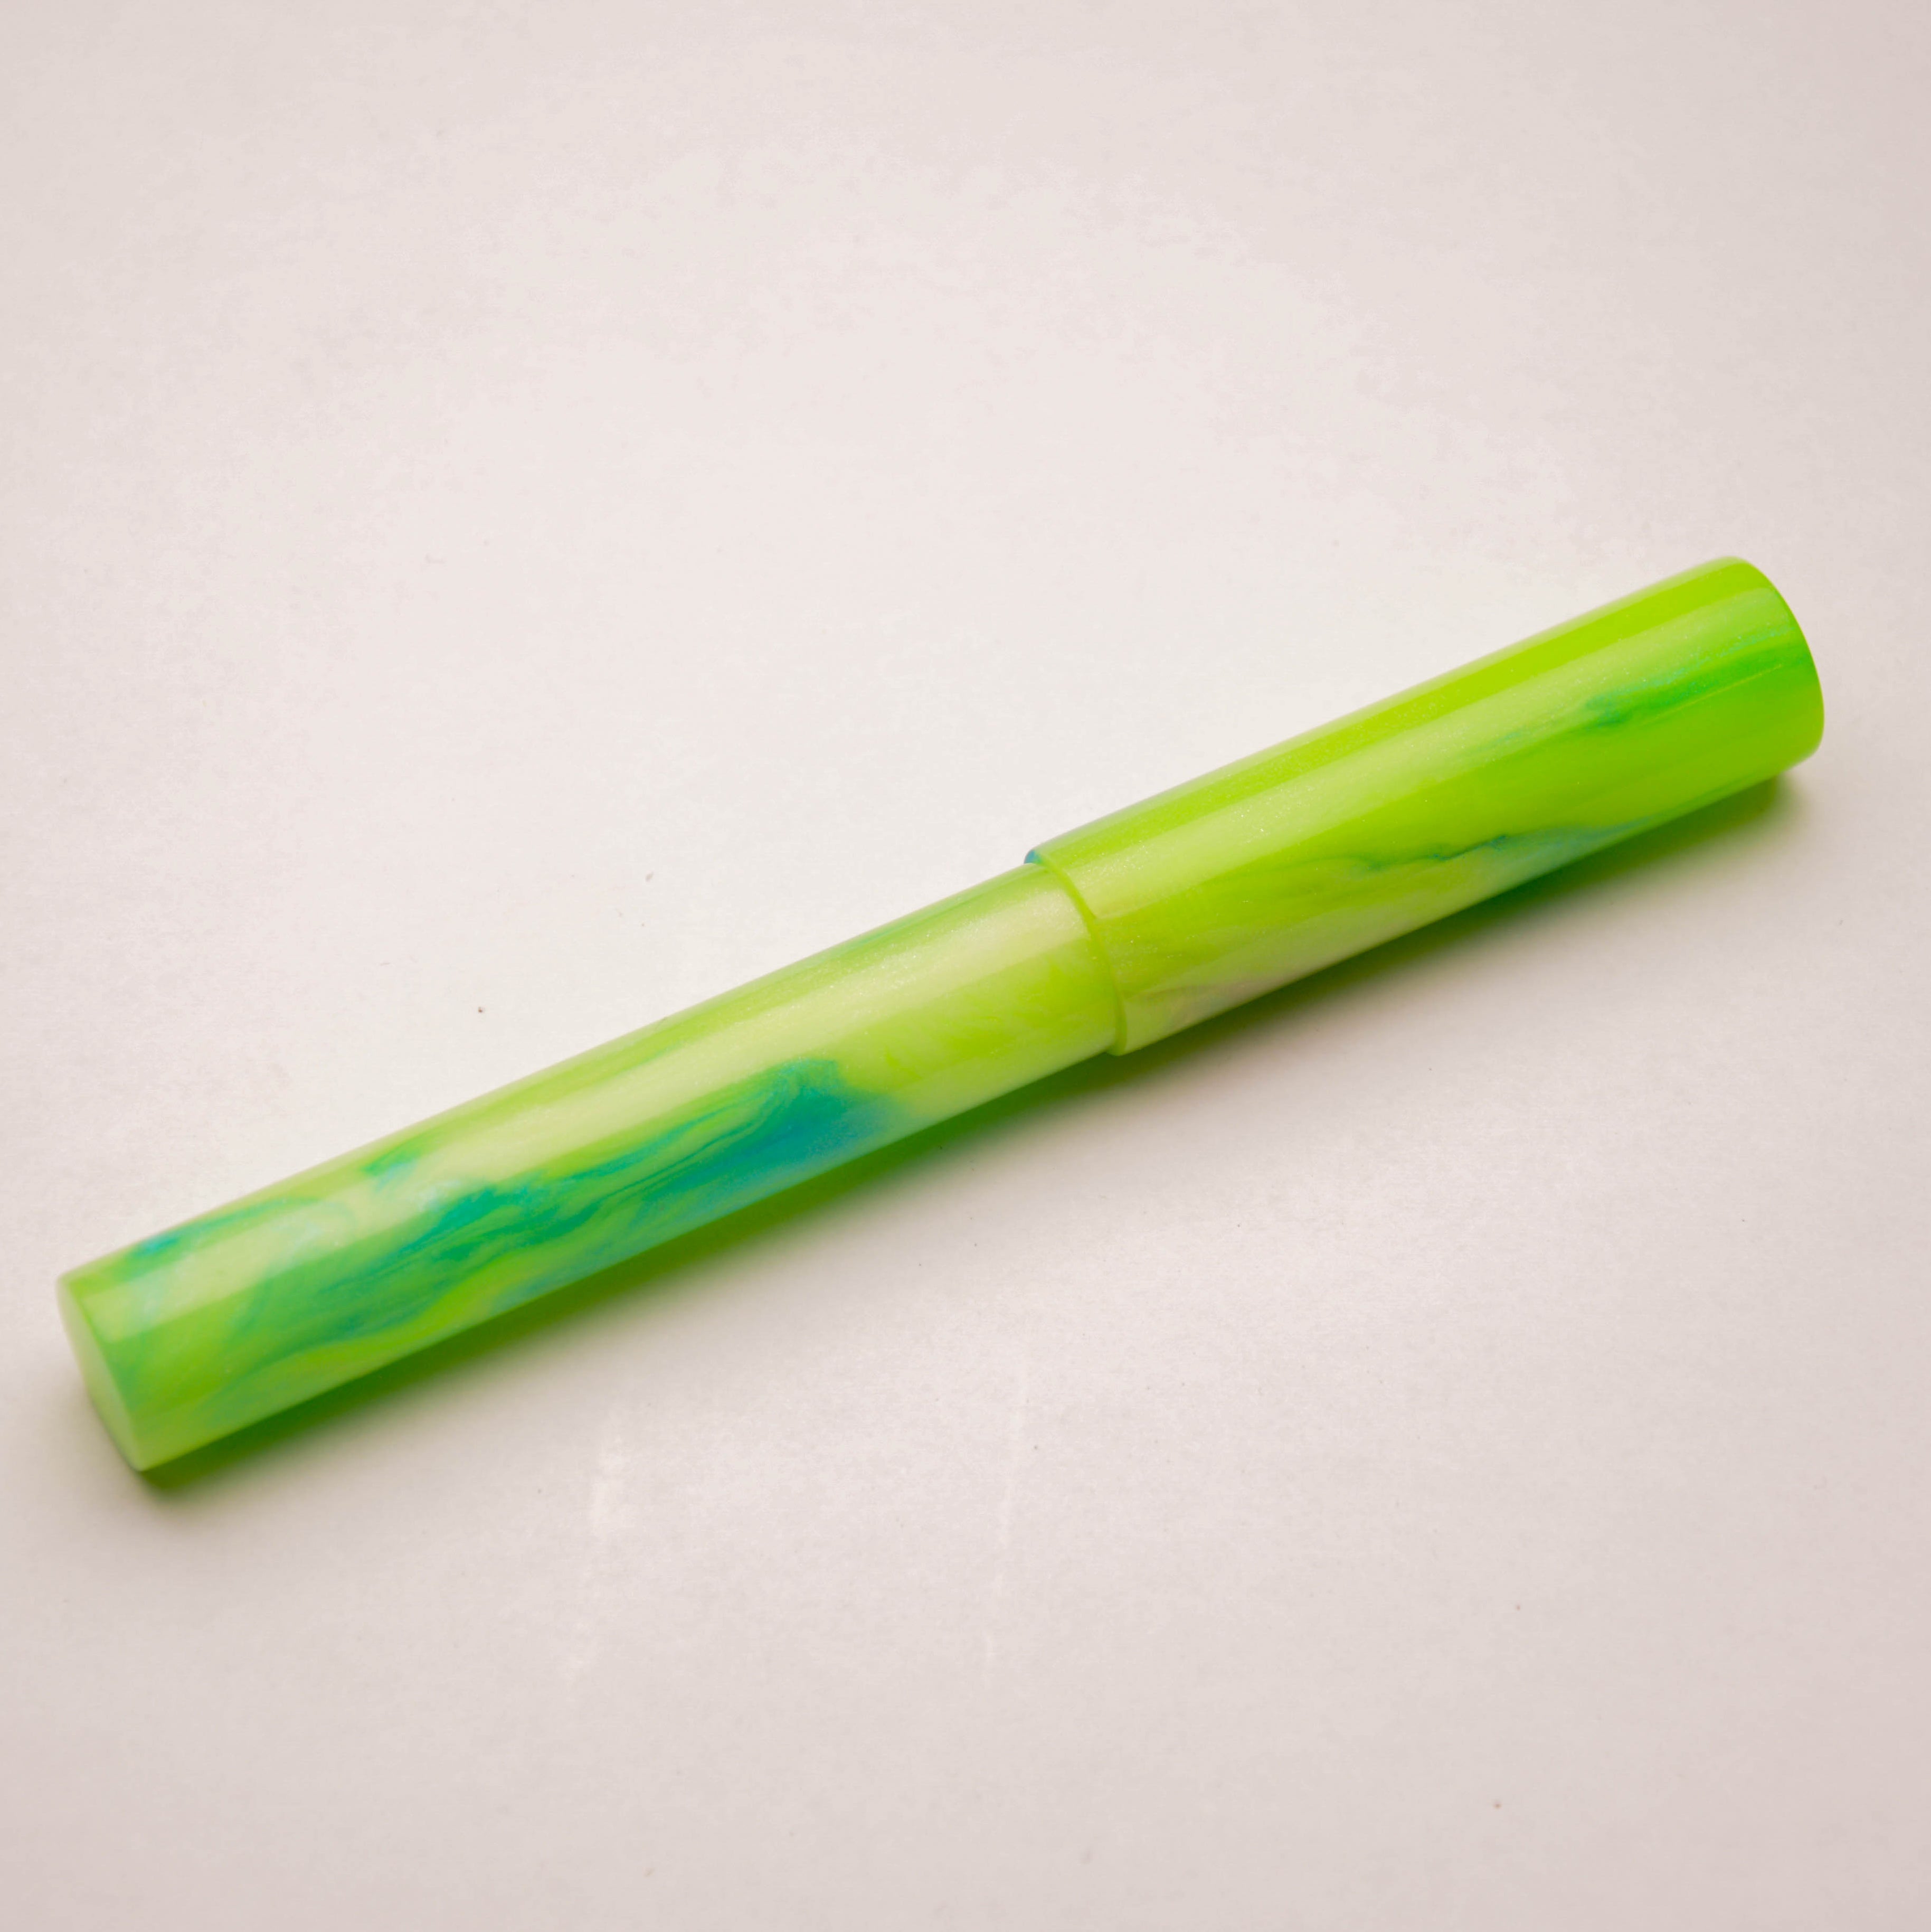 Fountain Pen - JoWo #6 - 13 mm - In-house material with neon green, blue and pearl